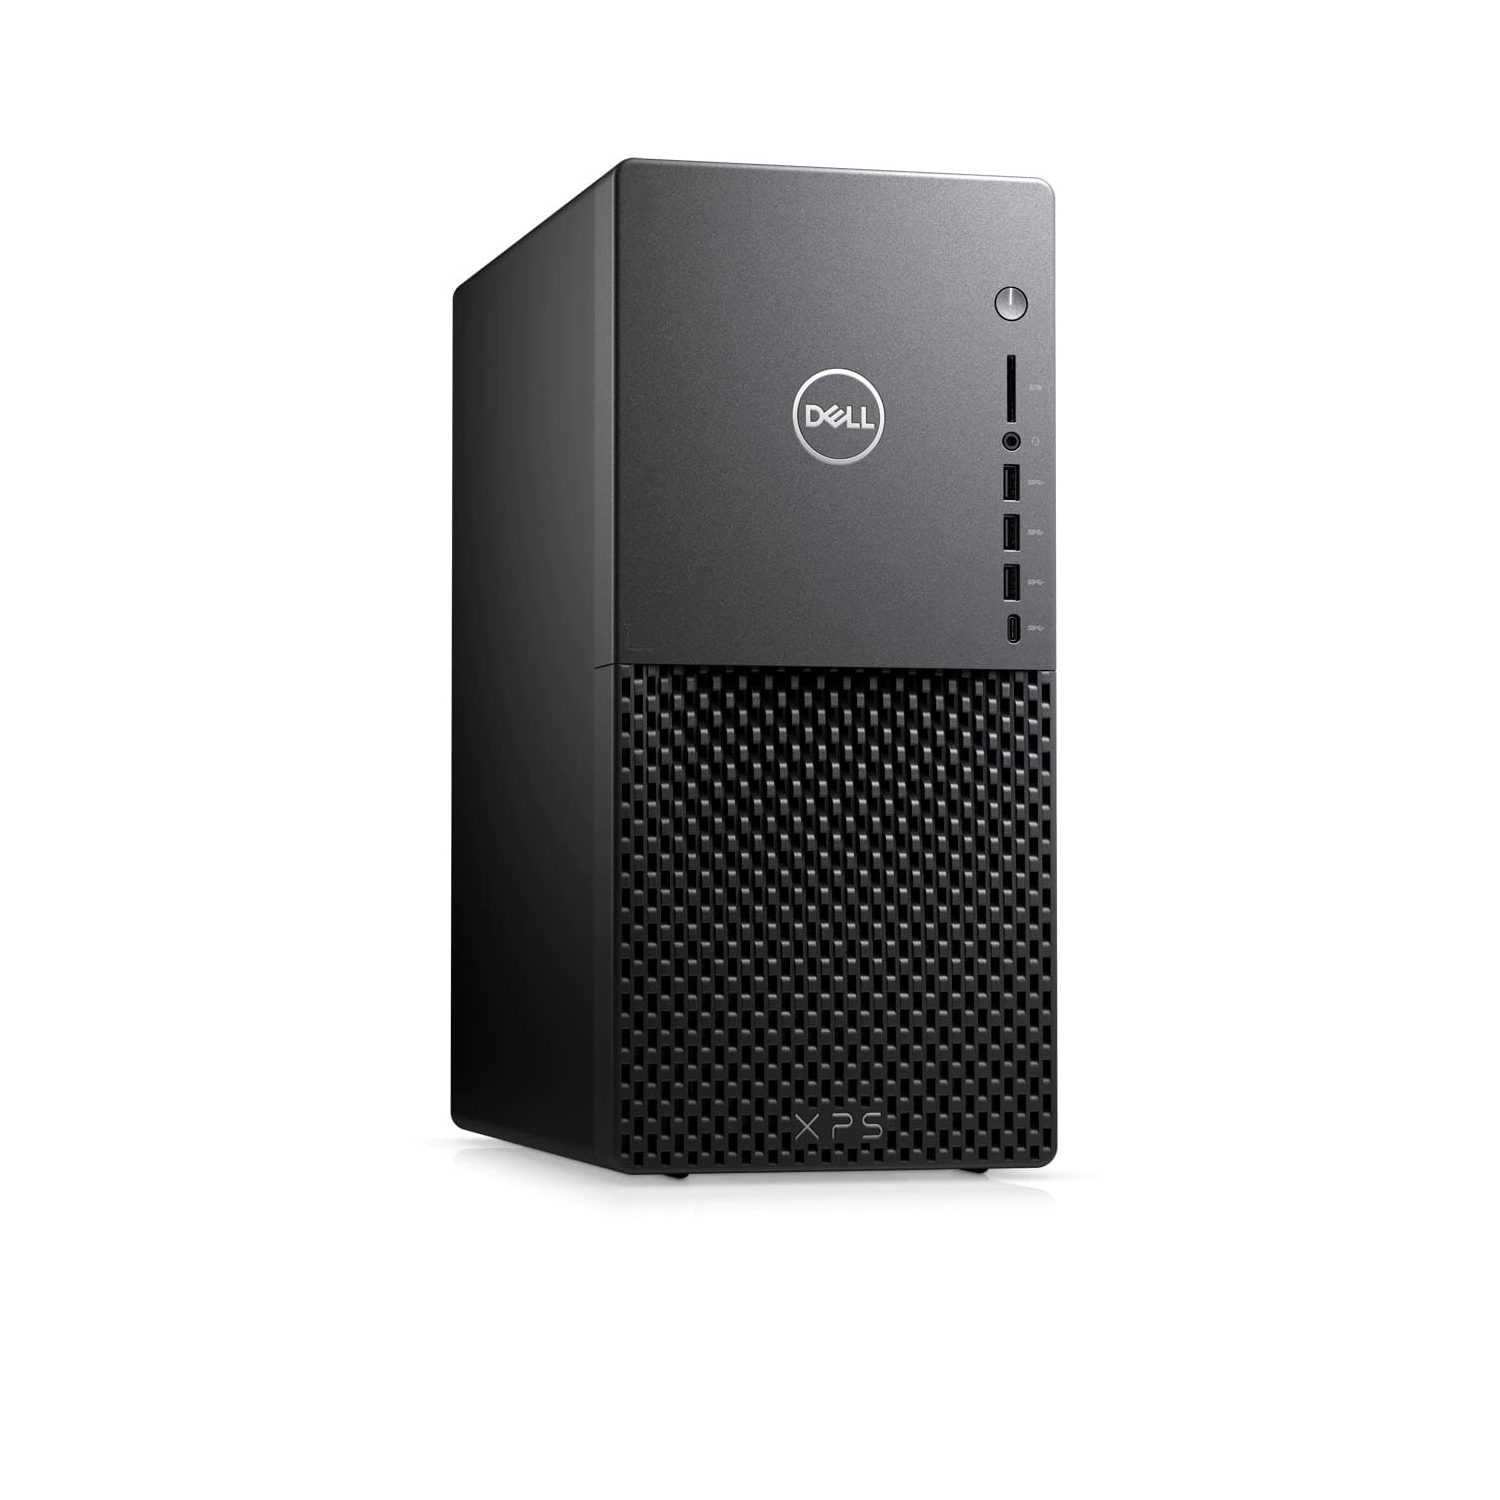 Refurbished (Excellent) - Dell XPS 8940 Desktop (2020) | Core i7 - 2TB HDD + 1TB SSD - 32GB RAM - GT 1030 | 8 Cores @ 4.8 GHz - 10th Gen CPU Certified Refurbished